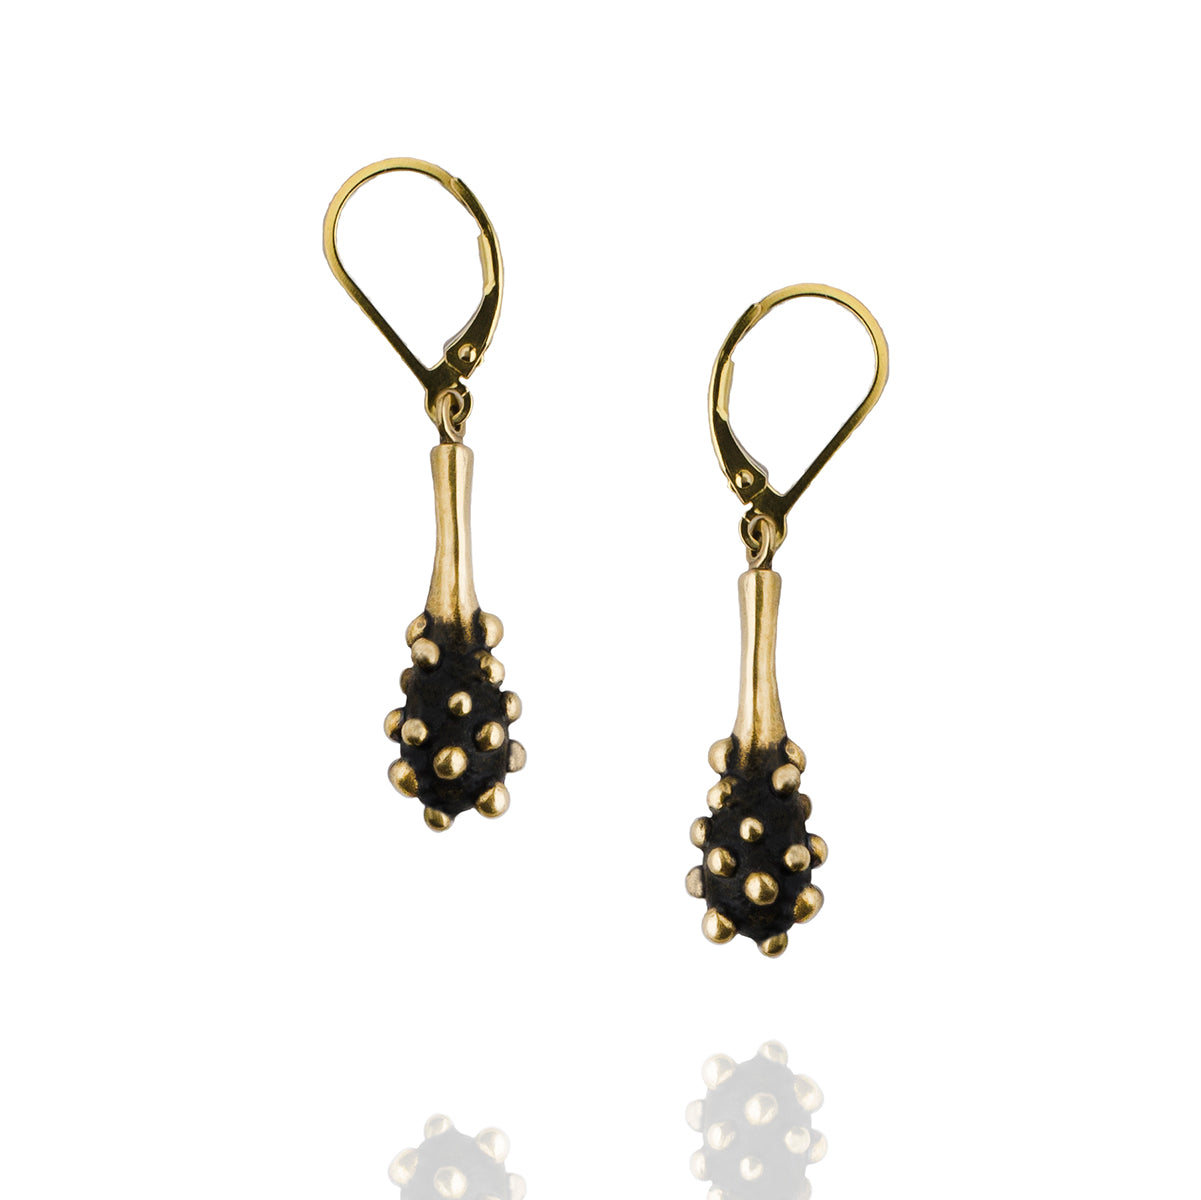 Porterness Studio Bronze and Gold Filled Demi-Sec In Motion Drop Earrings Bam Bam